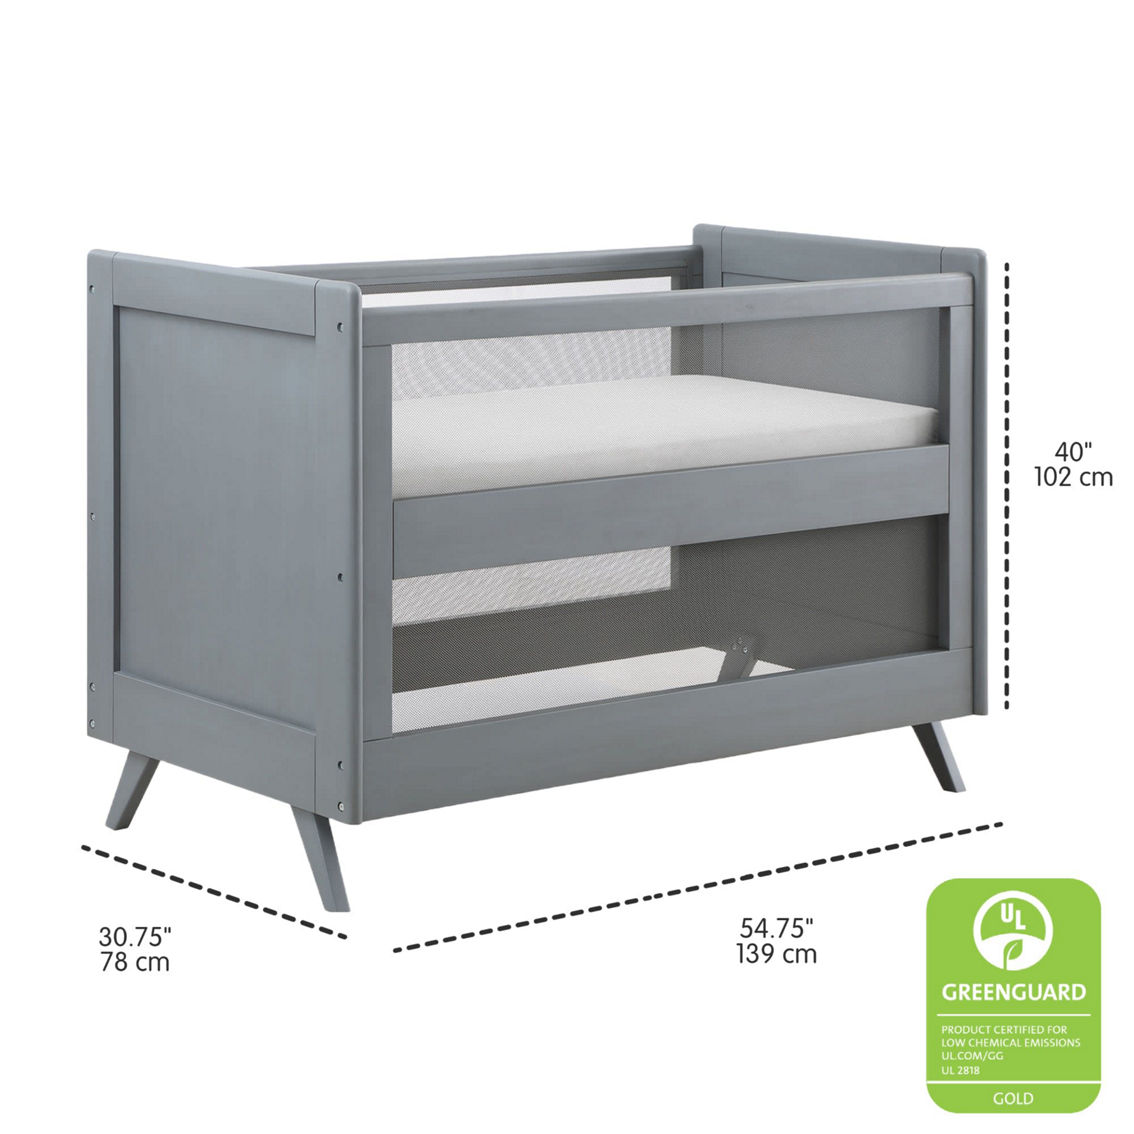 BreathableBaby Breathable Mesh 3-in-1 Convertible Crib - Image 3 of 5